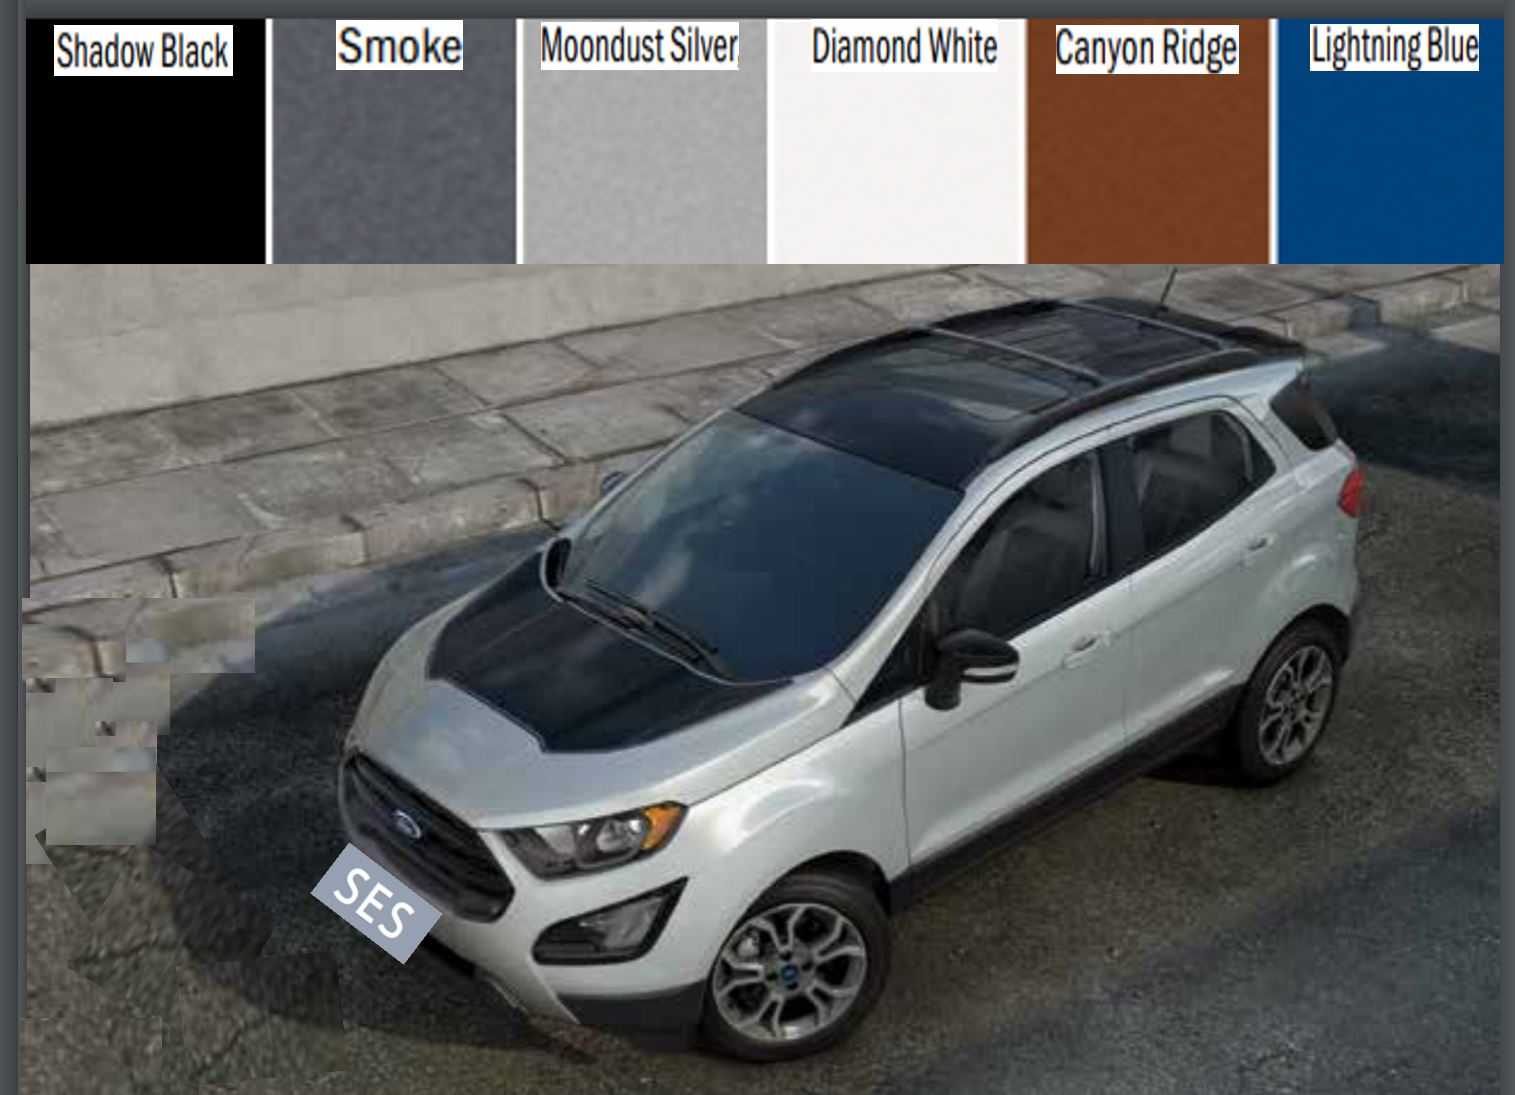 Exterior Paint Codes for the Ford Ecosport